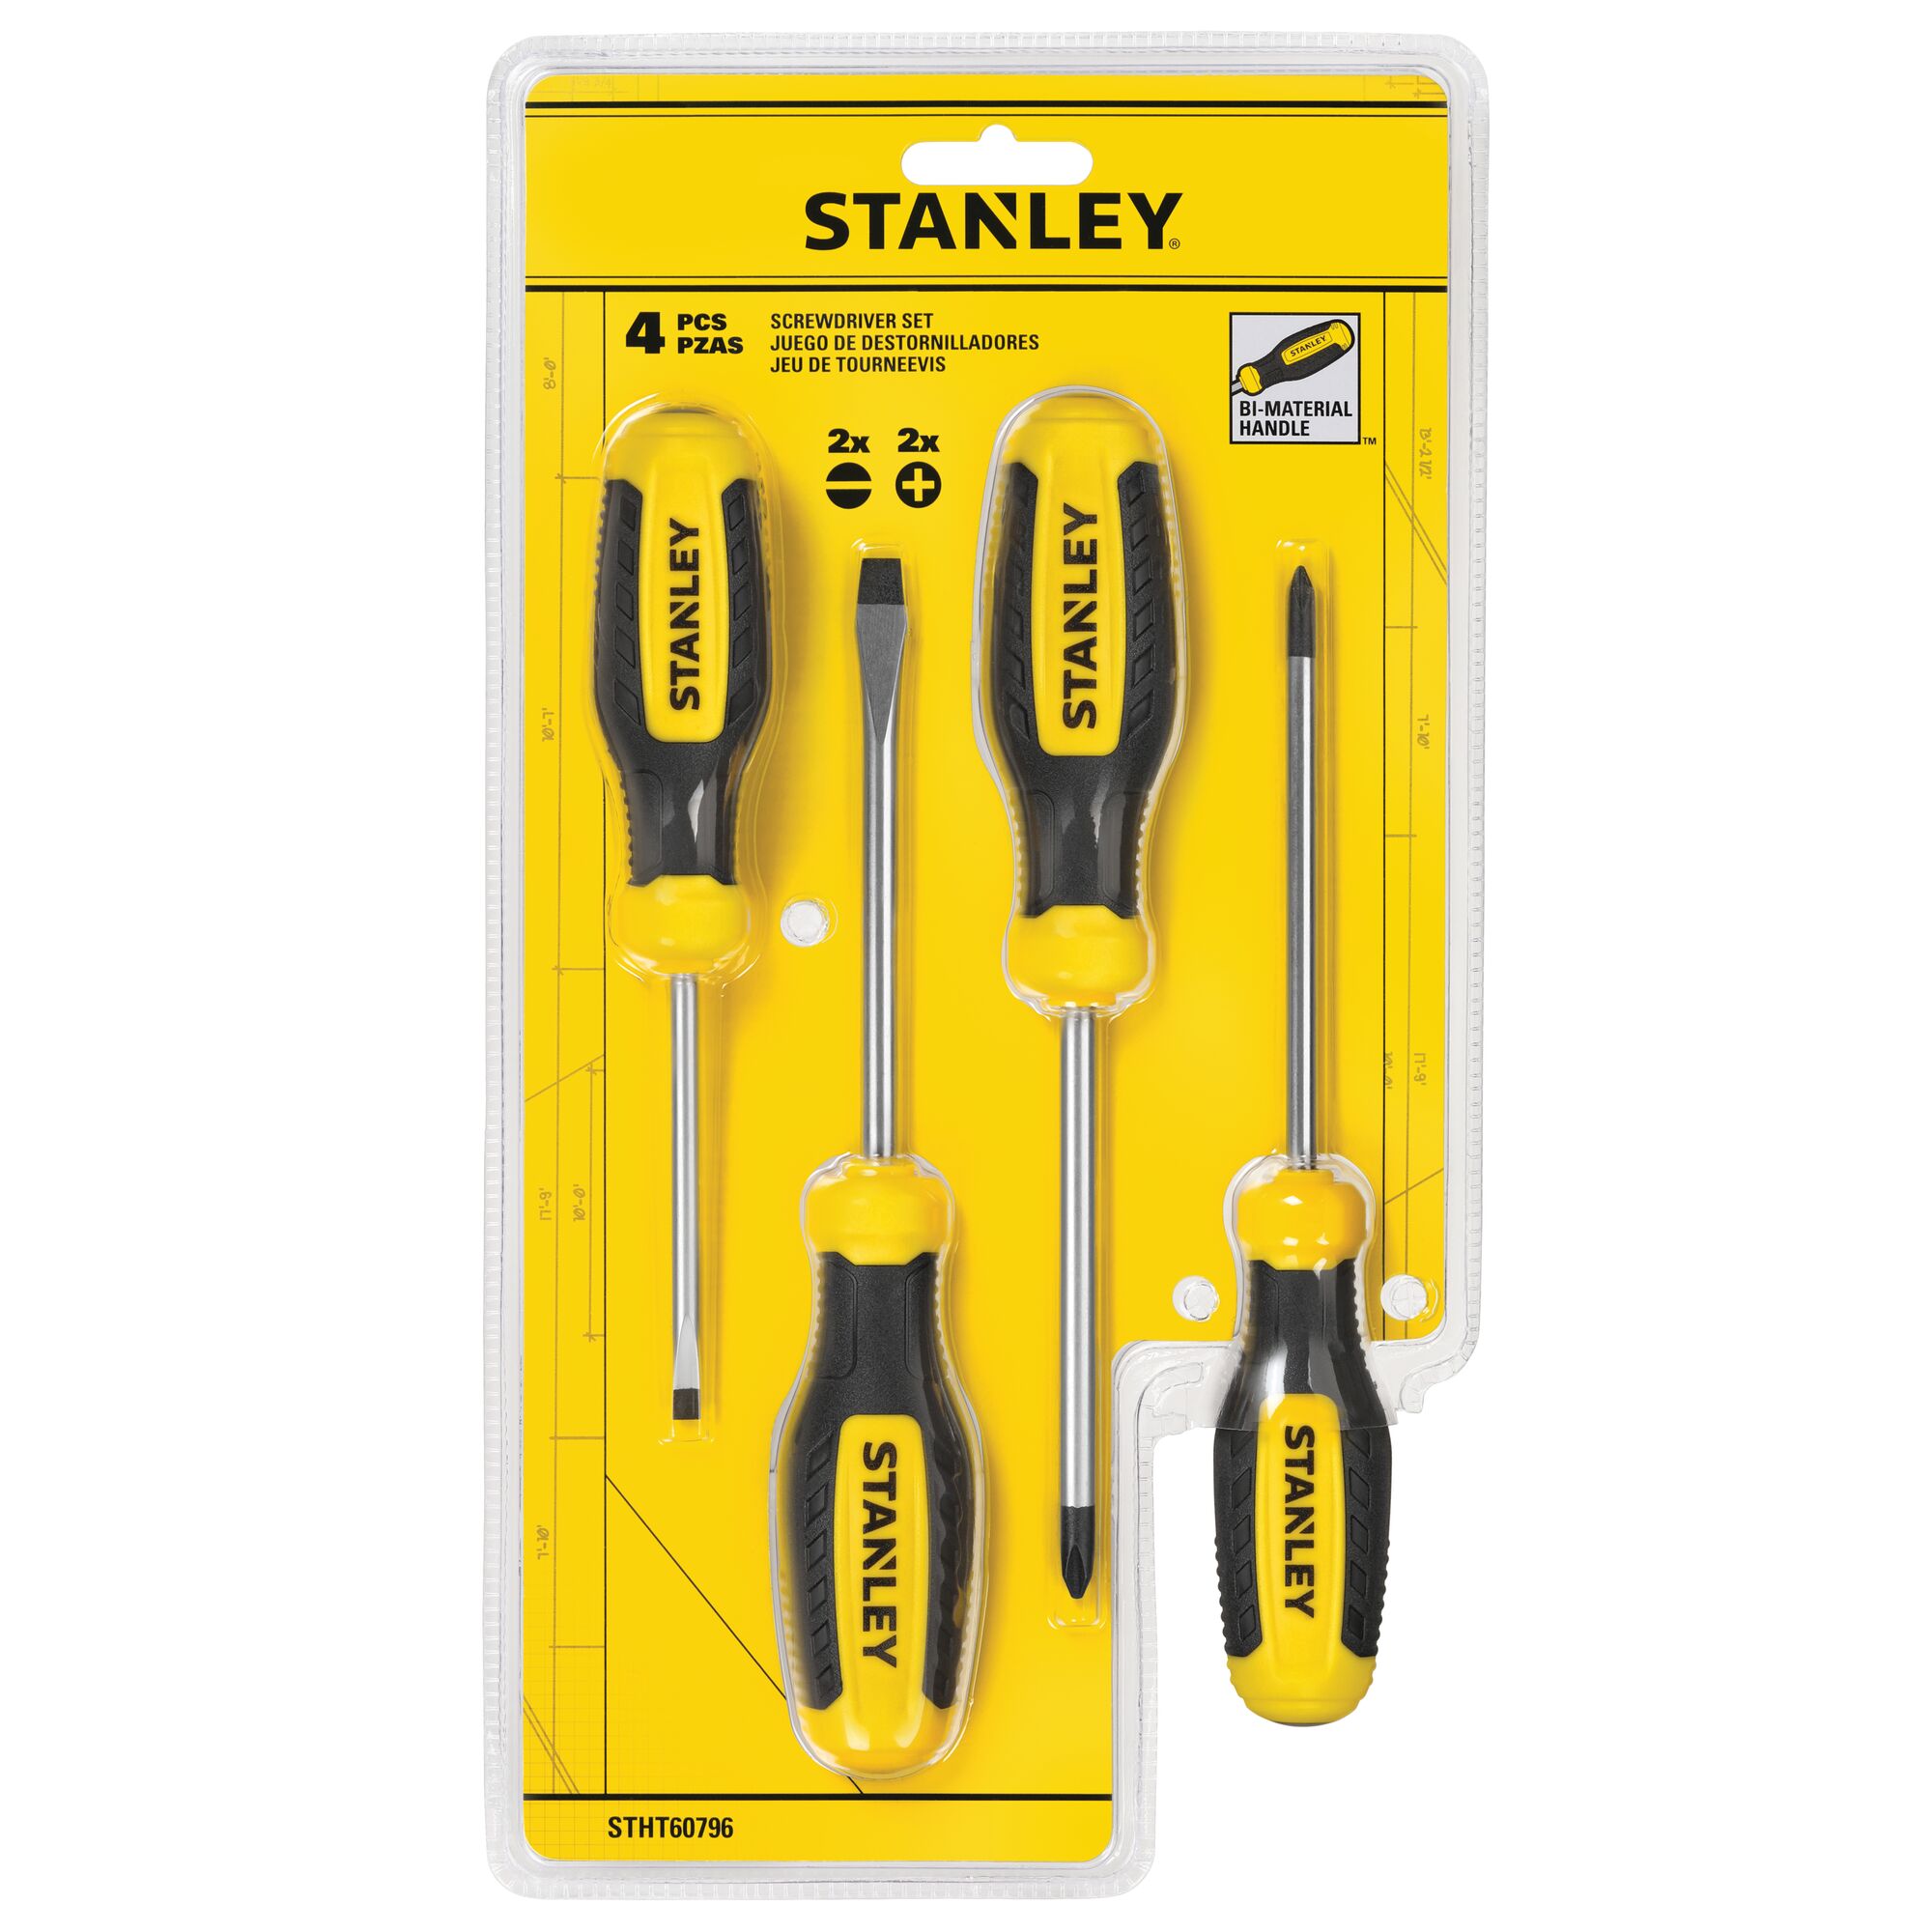 Set of Project Partners 4 Piece Precision Screwdriver with Comfort Grip Handle sets